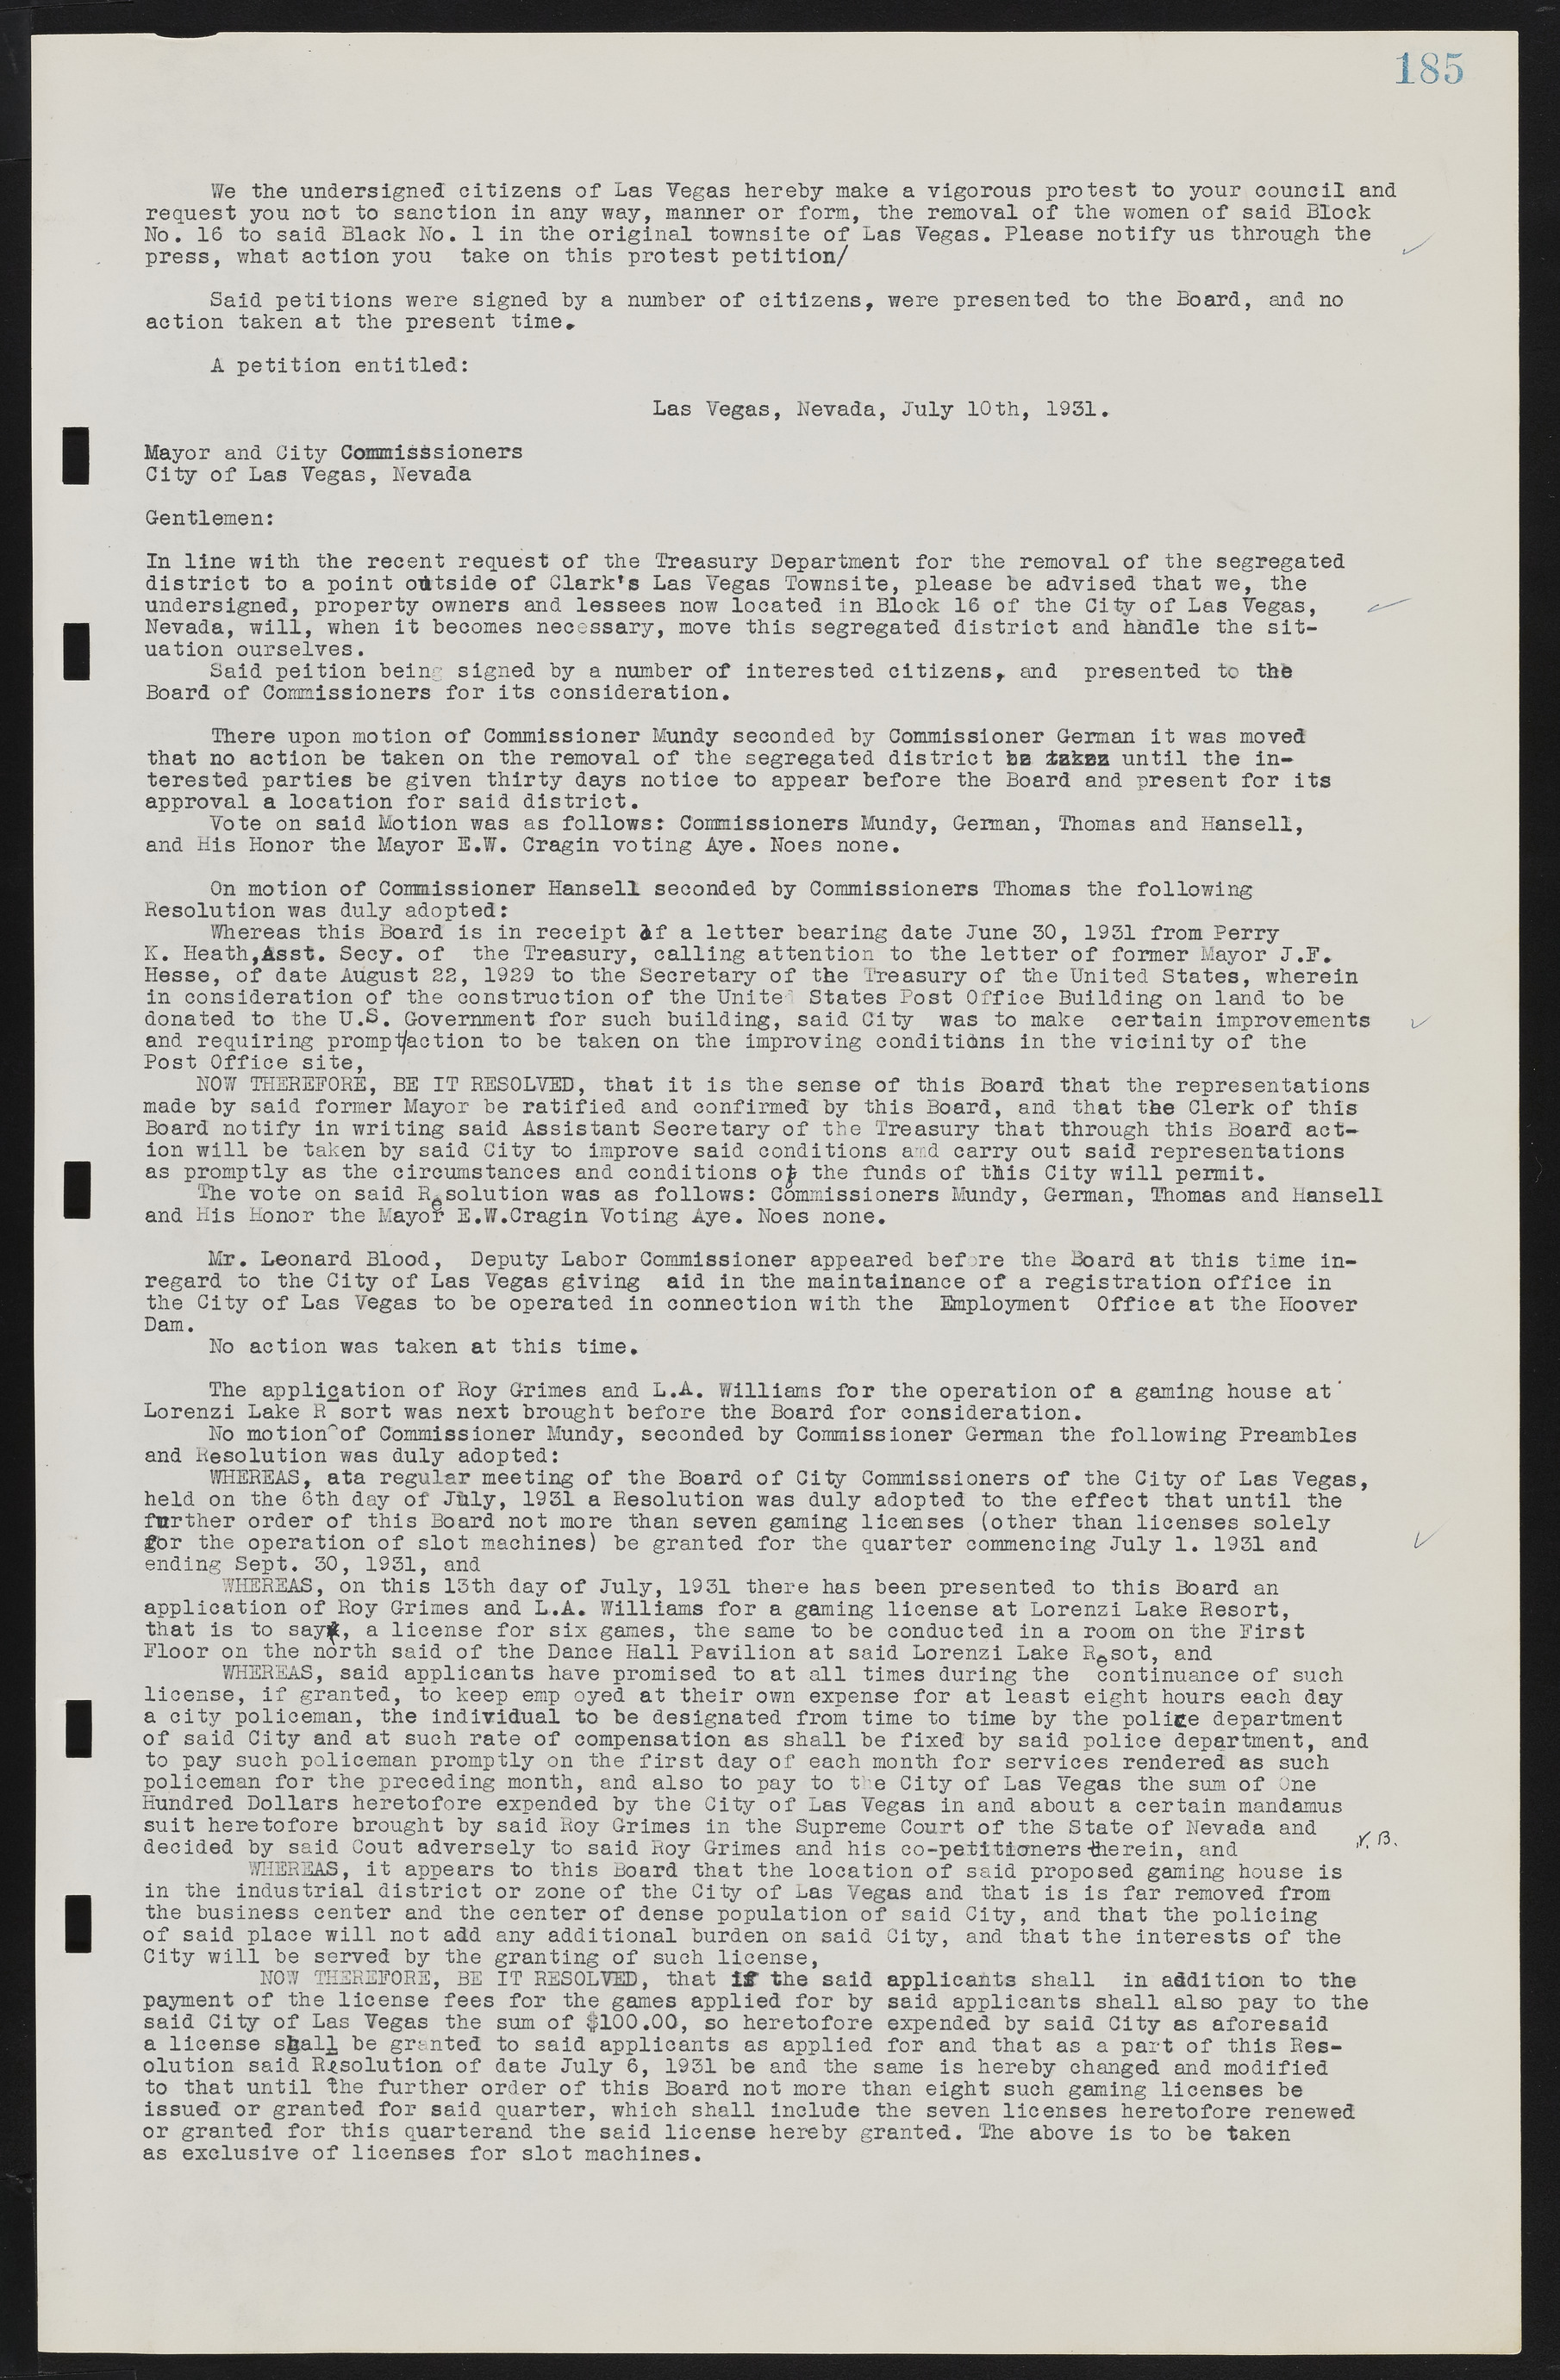 Las Vegas City Commission Minutes, May 14, 1929 to February 11, 1937, lvc000003-191